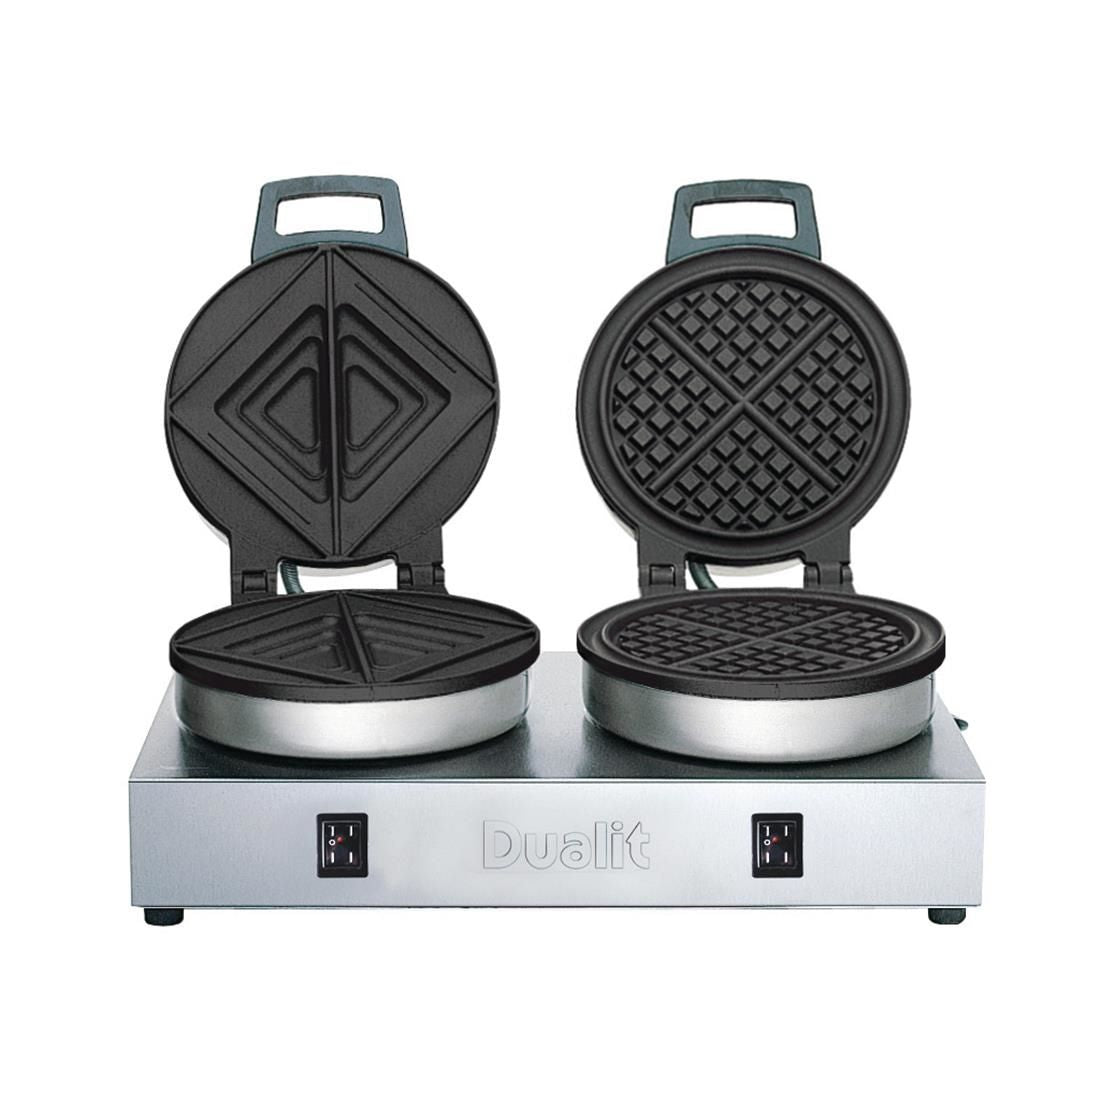 Dualit Toastie & Waffle Contact Toaster 73010 JD Catering Equipment Solutions Ltd